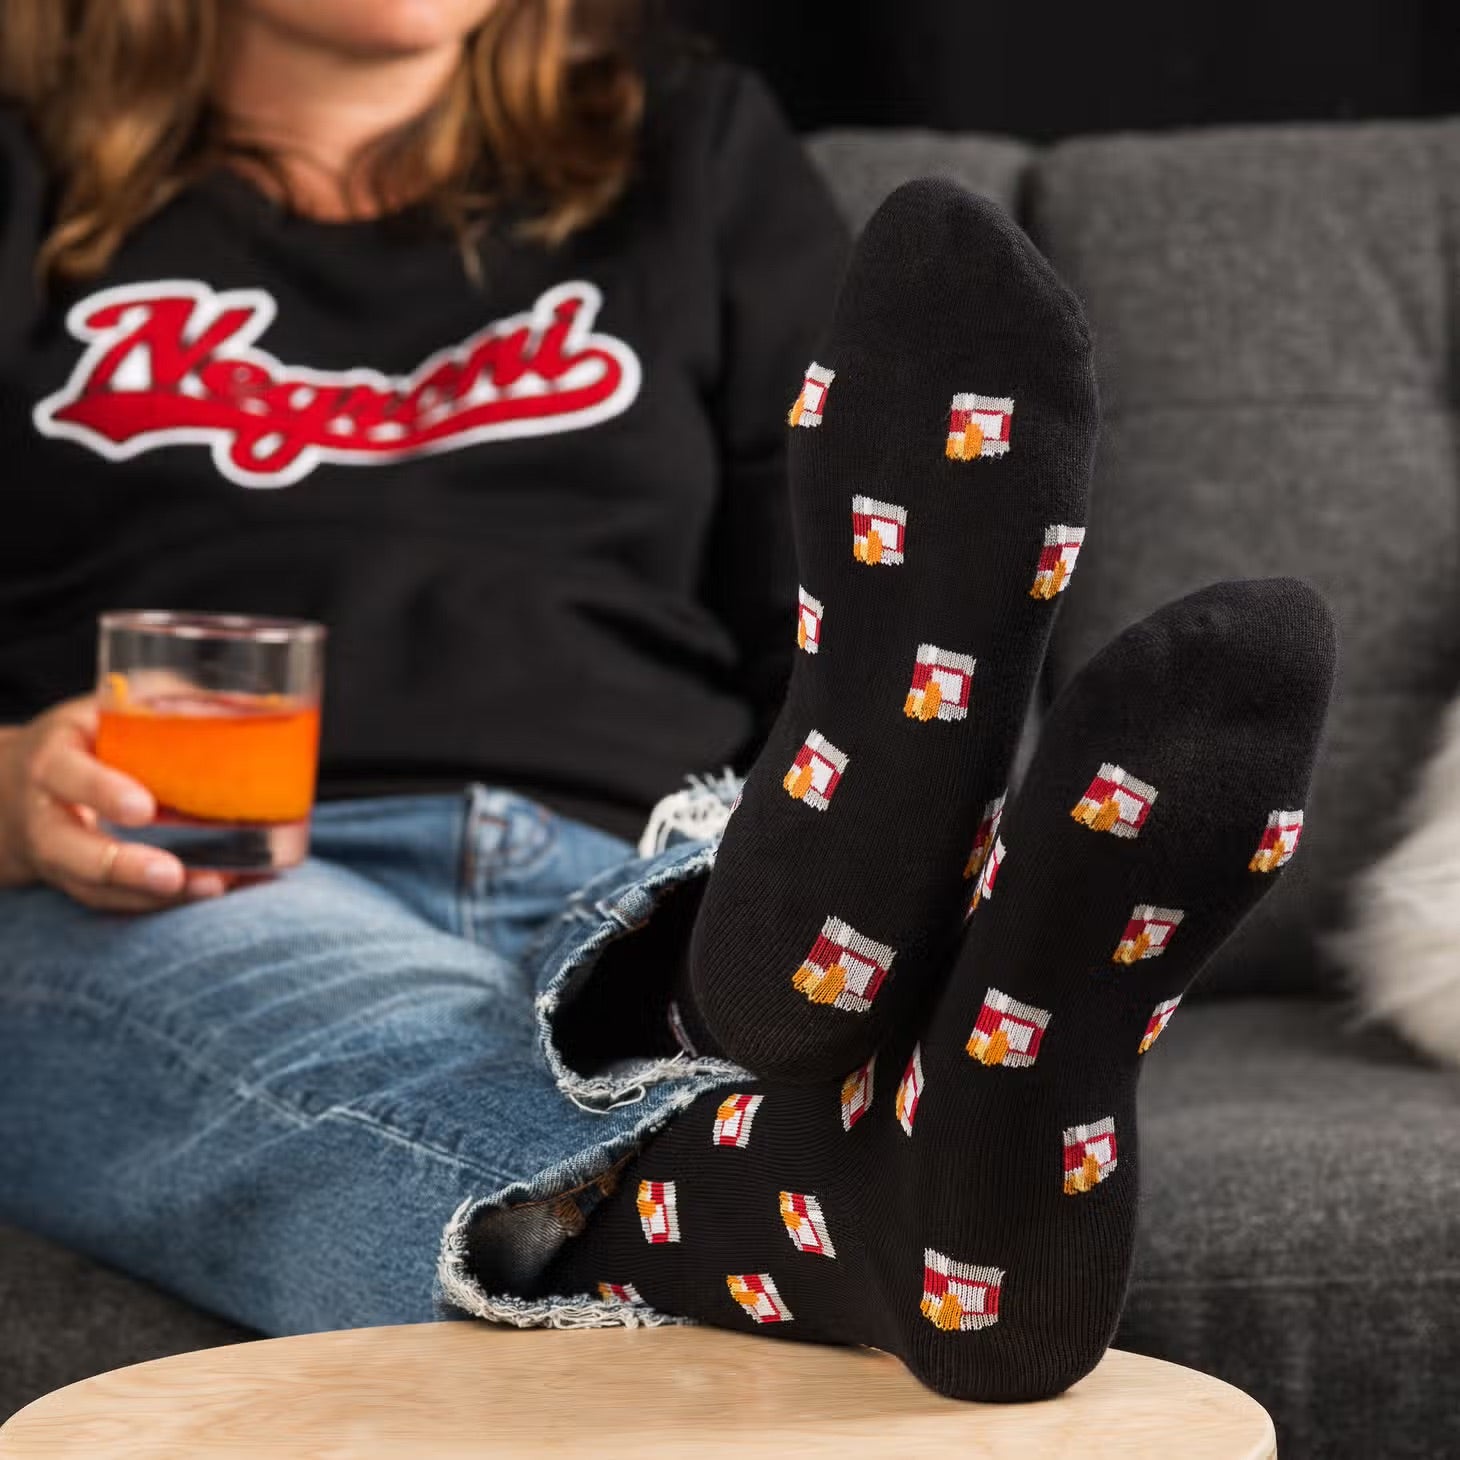 Person sitting on a couch, drinking a negroni, wearing a negroni shirt, with their feet on a coffee table to display their Negroni Socks.